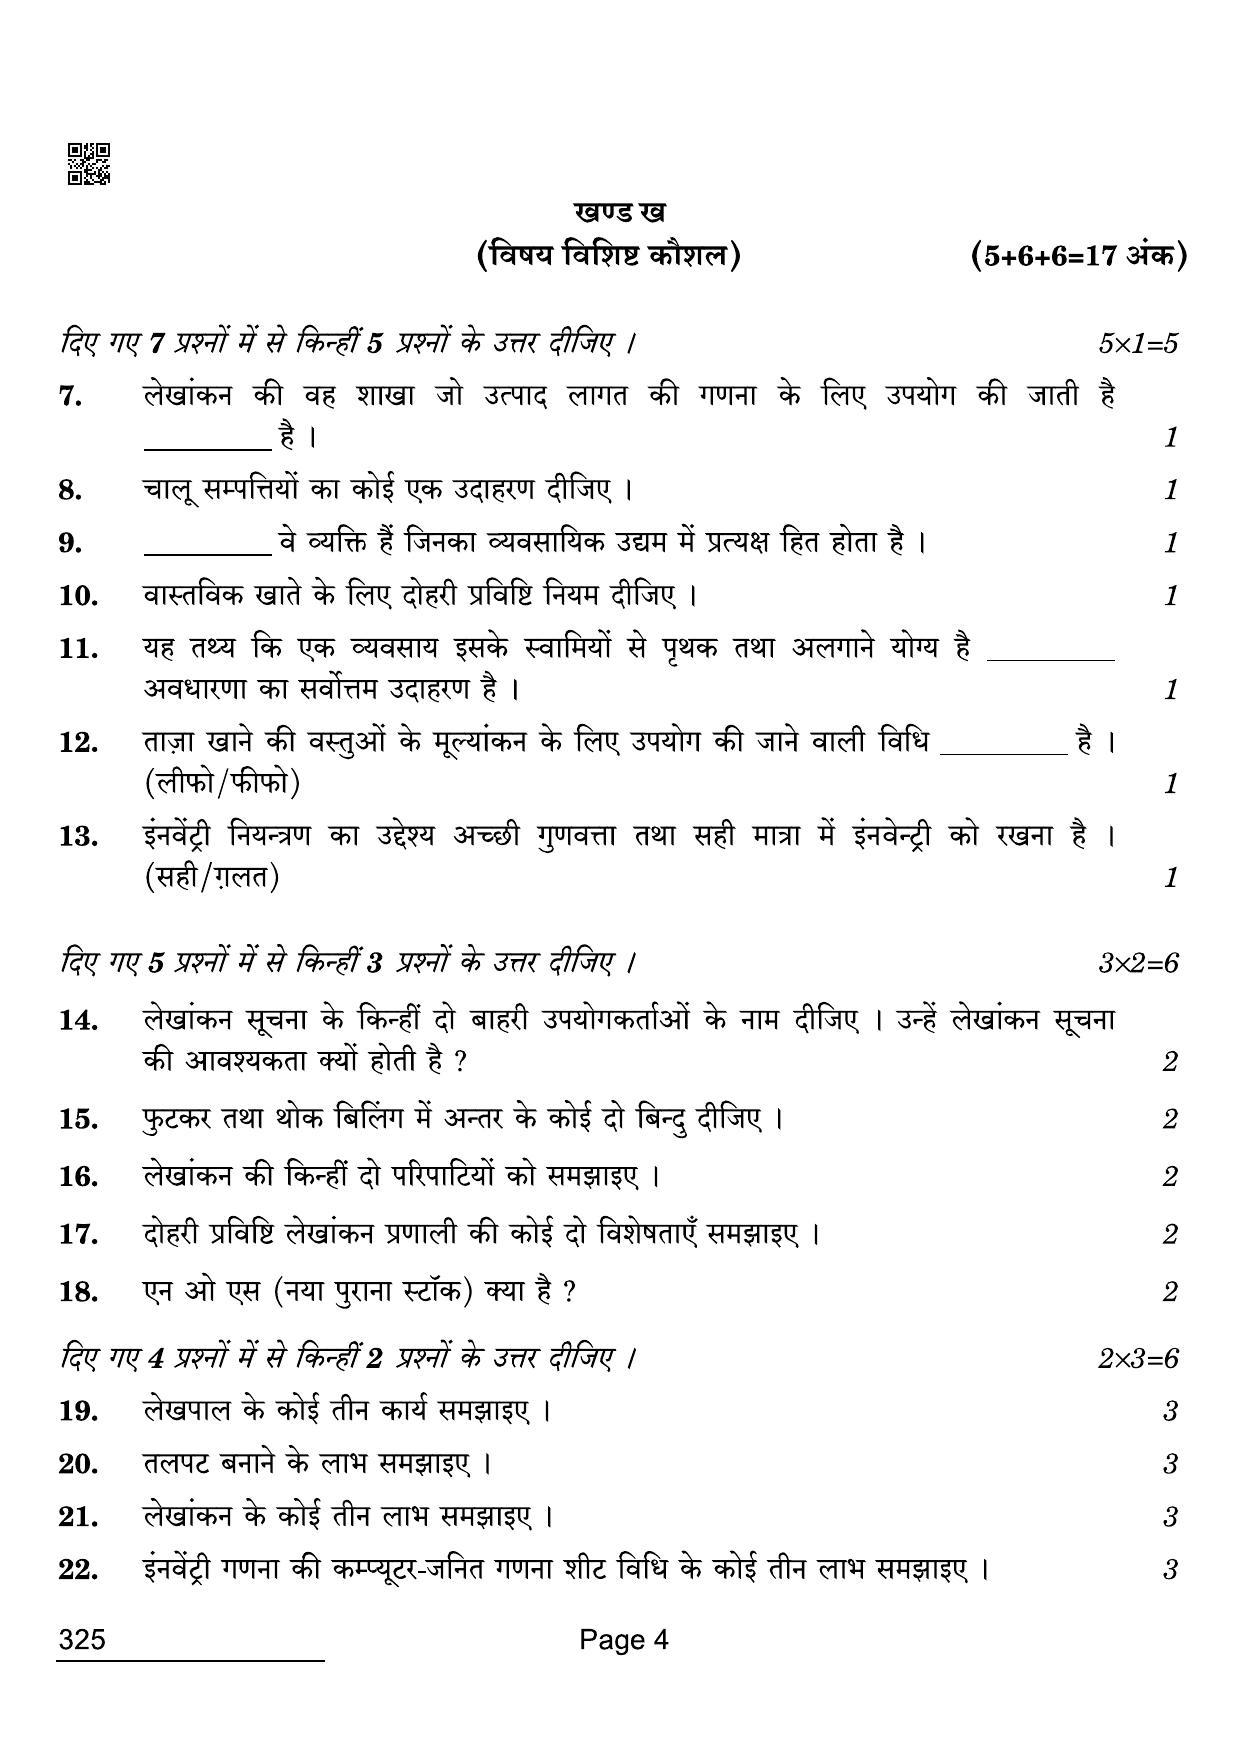 CBSE Class 12 325 Retail 2022 Compartment Question Paper - Page 4